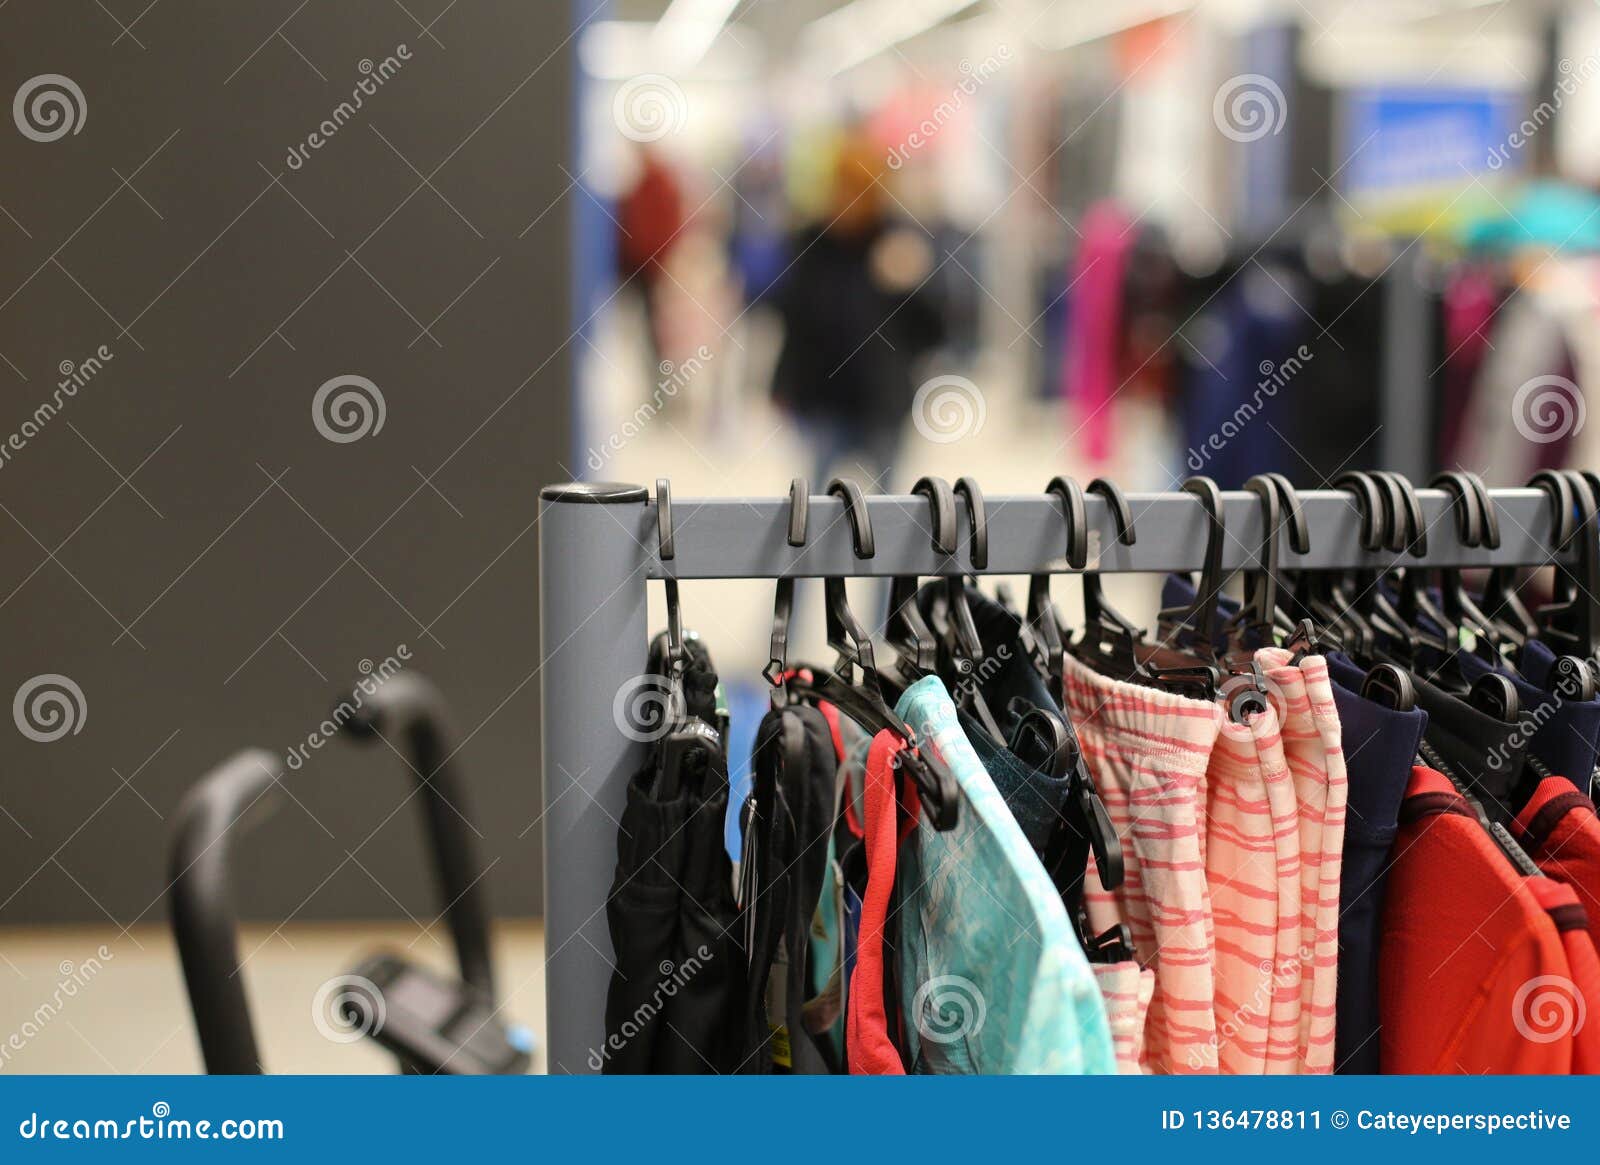 Details with Clothes on Hangers in a Clothing Store Stock Image - Image ...